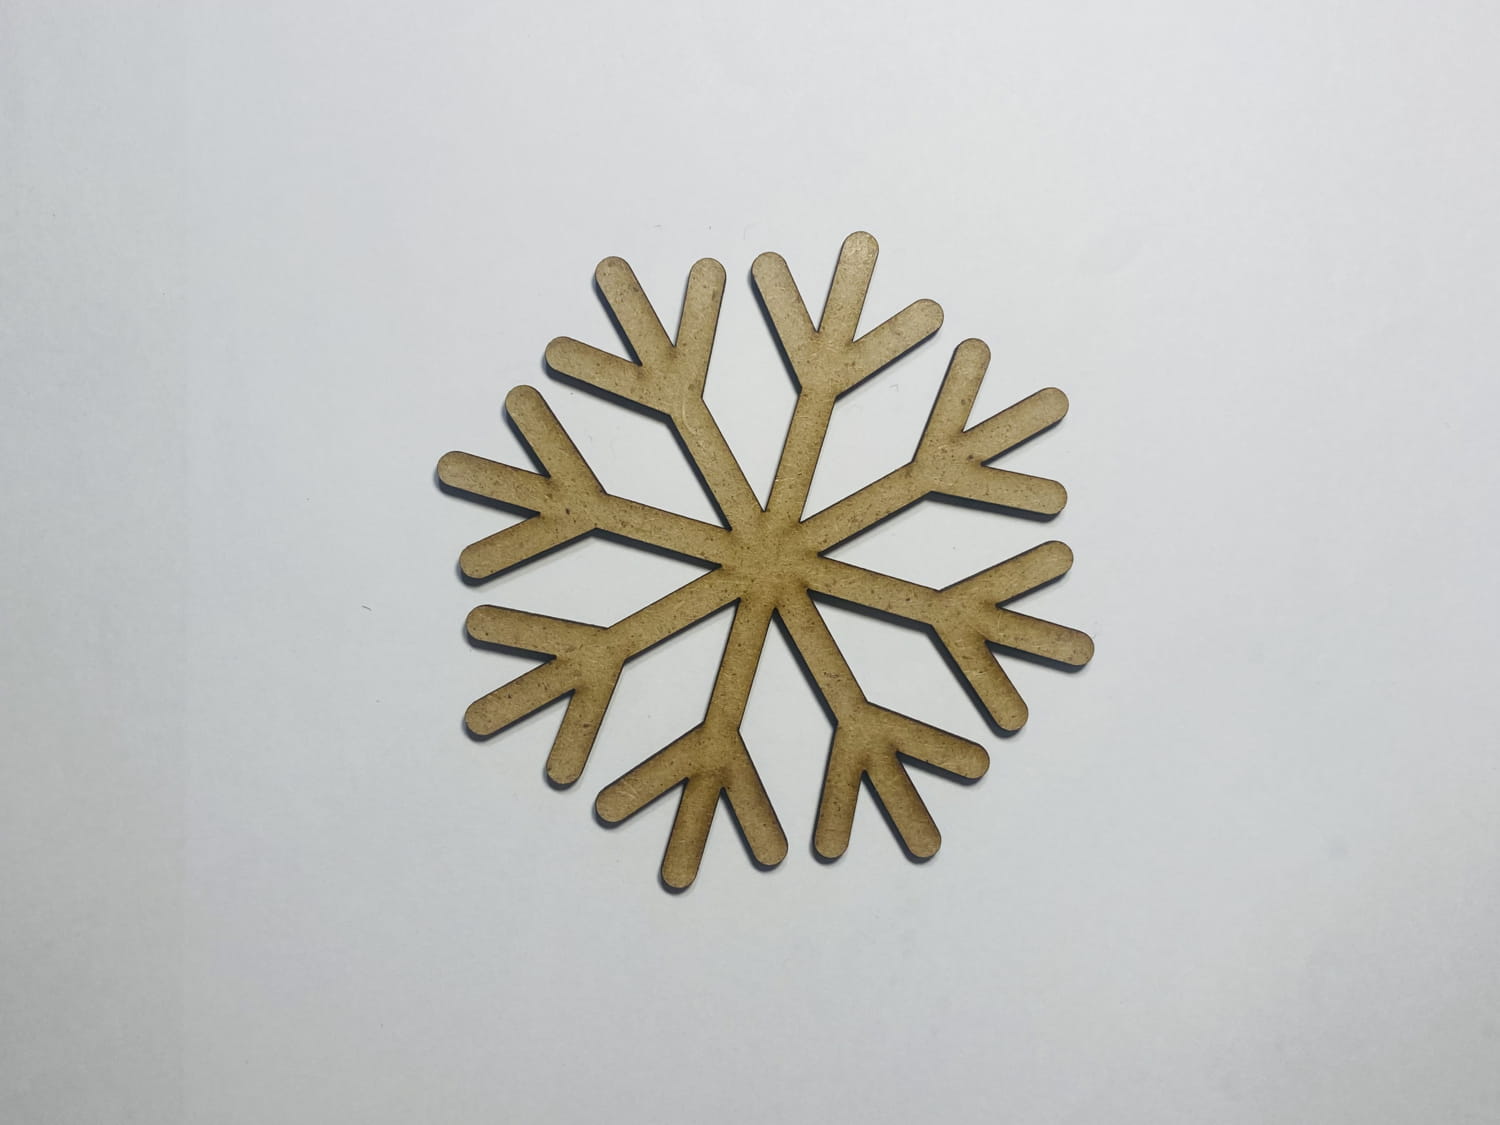 Laser Cut Snowflake Cutout Unfinished Wood Shape Craft Free Vector